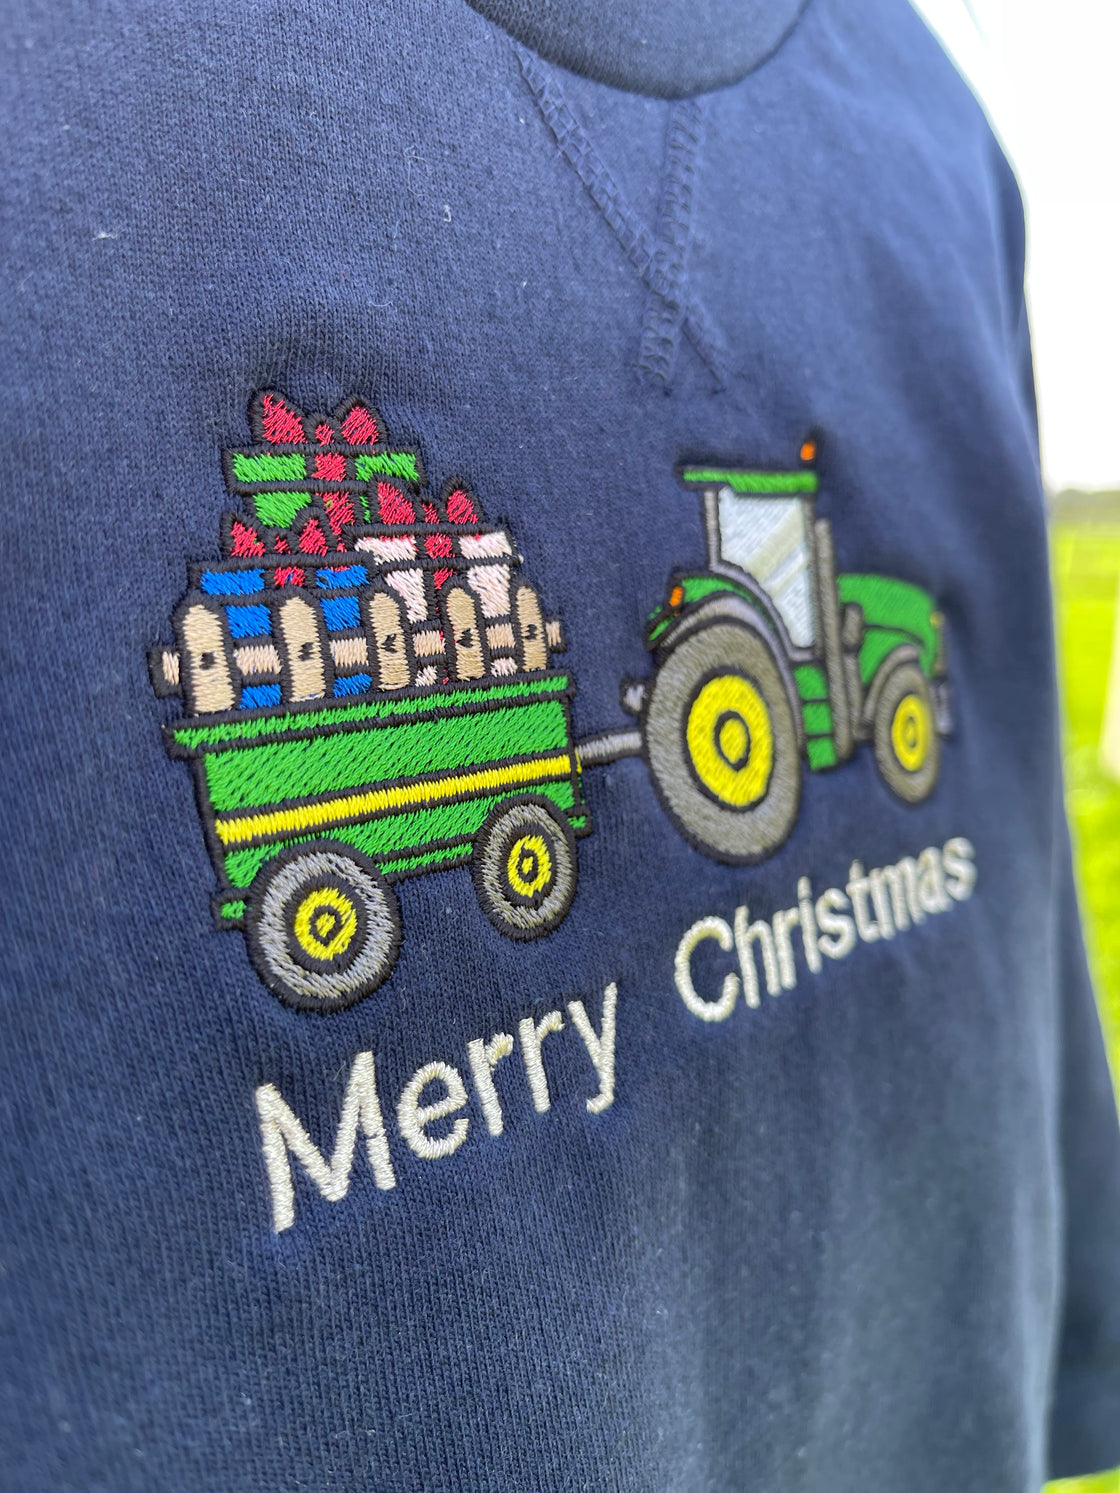 Children's Christmas Sustainable Sweatshirt Embroidered With Tractor & Trailer design